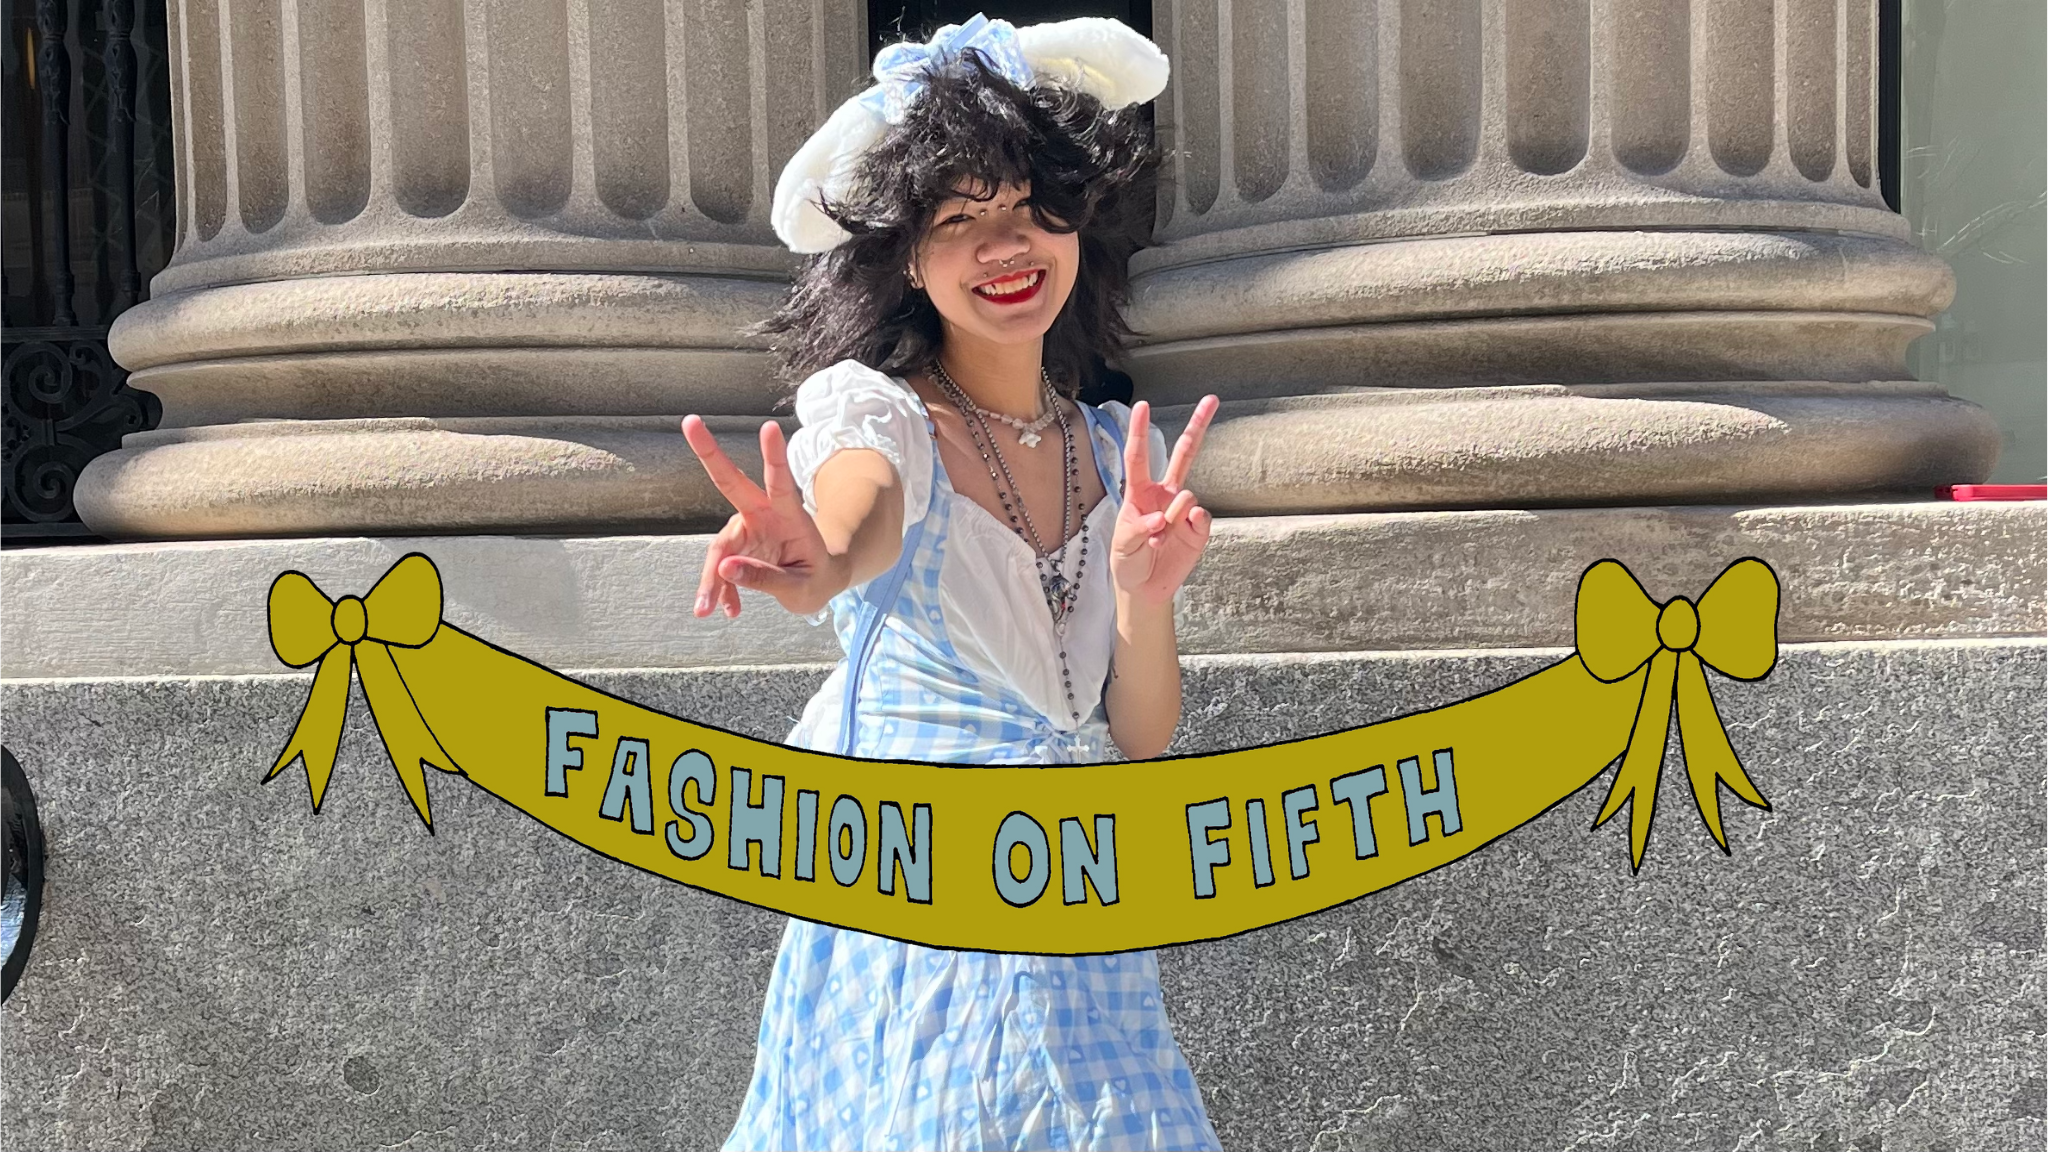 A green banner that says “Fashion on Fifth” in bold blue letters in front of a student wearing a blue gingham dress and white bunny ears.